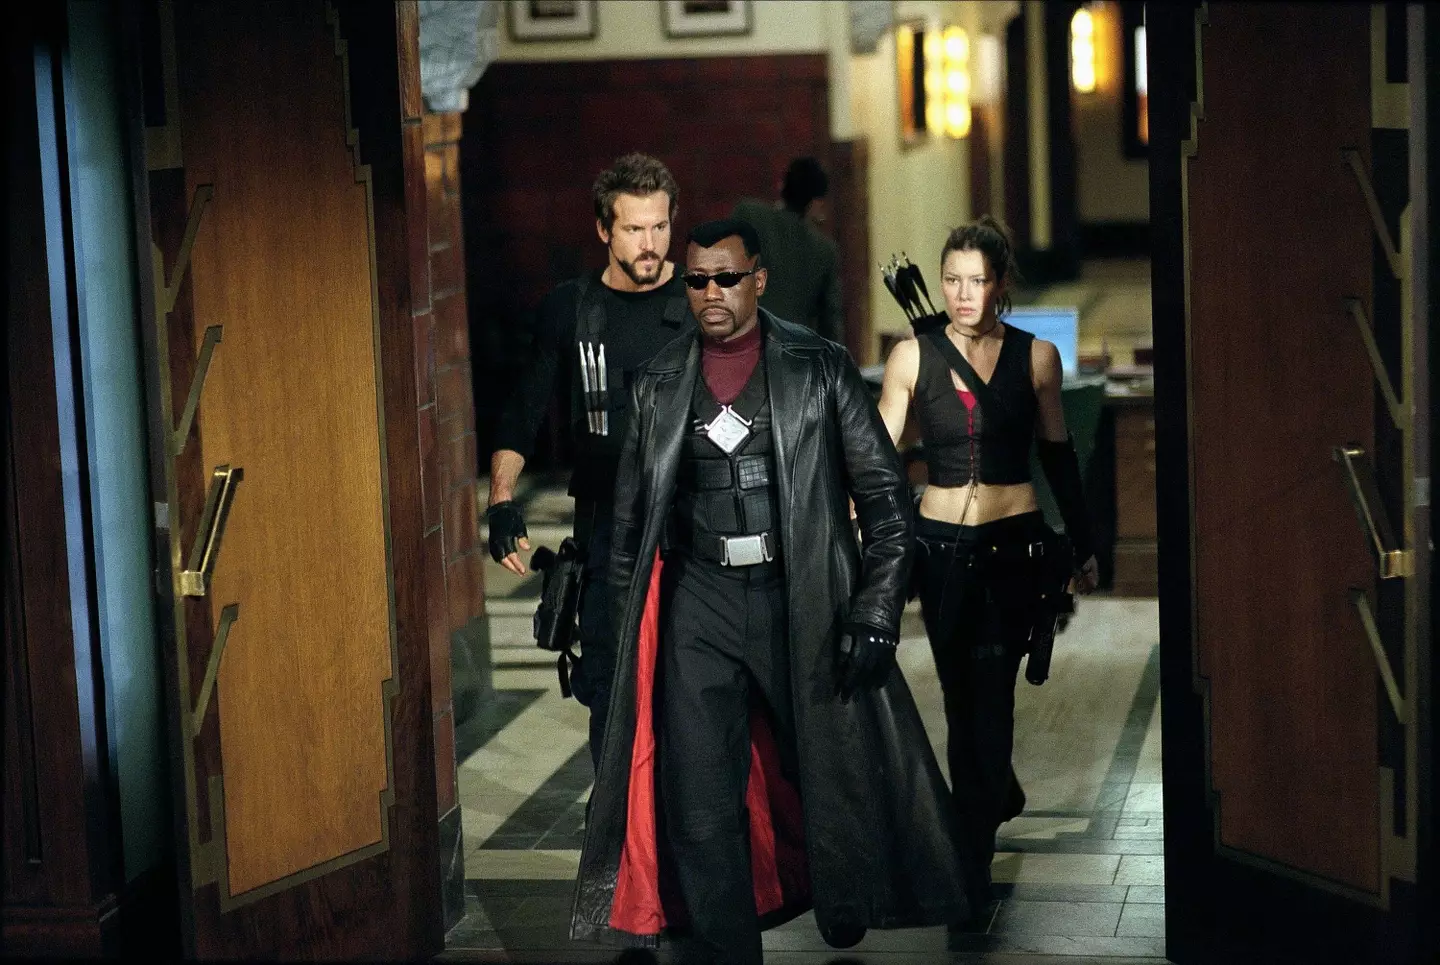 Ryan Reynolds admitted he and Wesley Snipes didn't get along very well on the set.